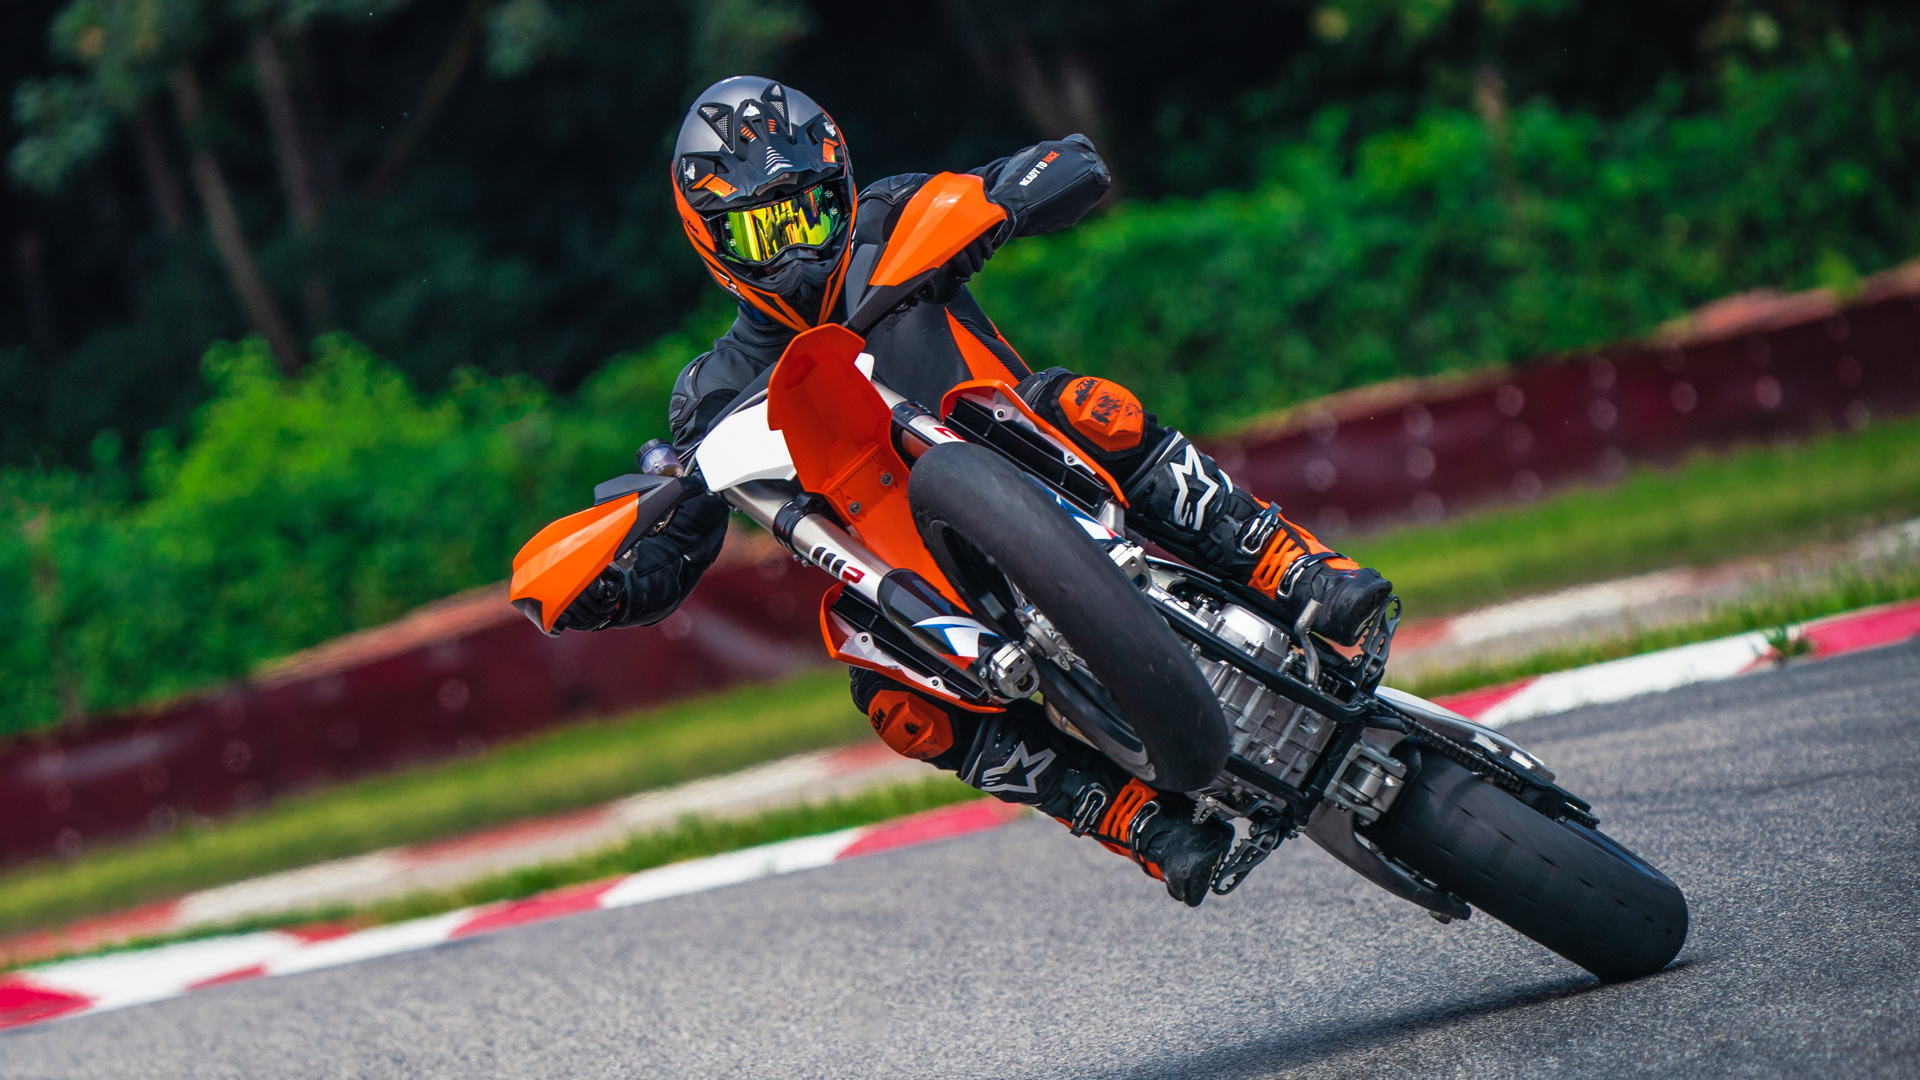 Supermoto: KTM 450 SMR, A competition-ready supermoto bike, Compact high-tech engine. 1920x1080 Full HD Background.